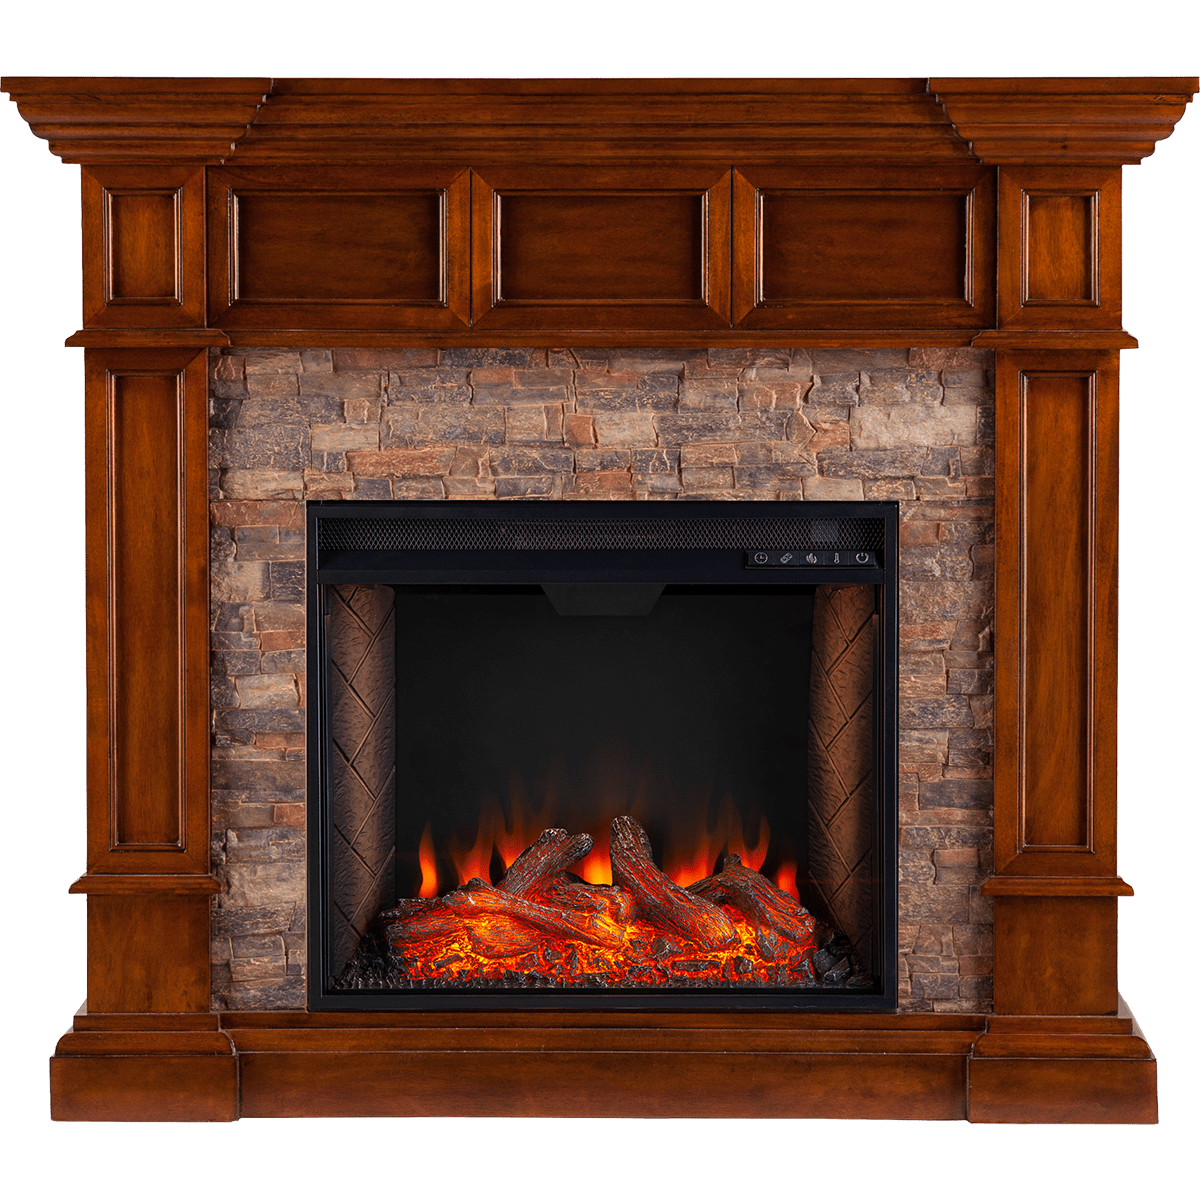 Electric Fireplace Remote Control Replacement Best Of southern Enterprises Merrimack Simulated Stone Convertible Electric Fireplace